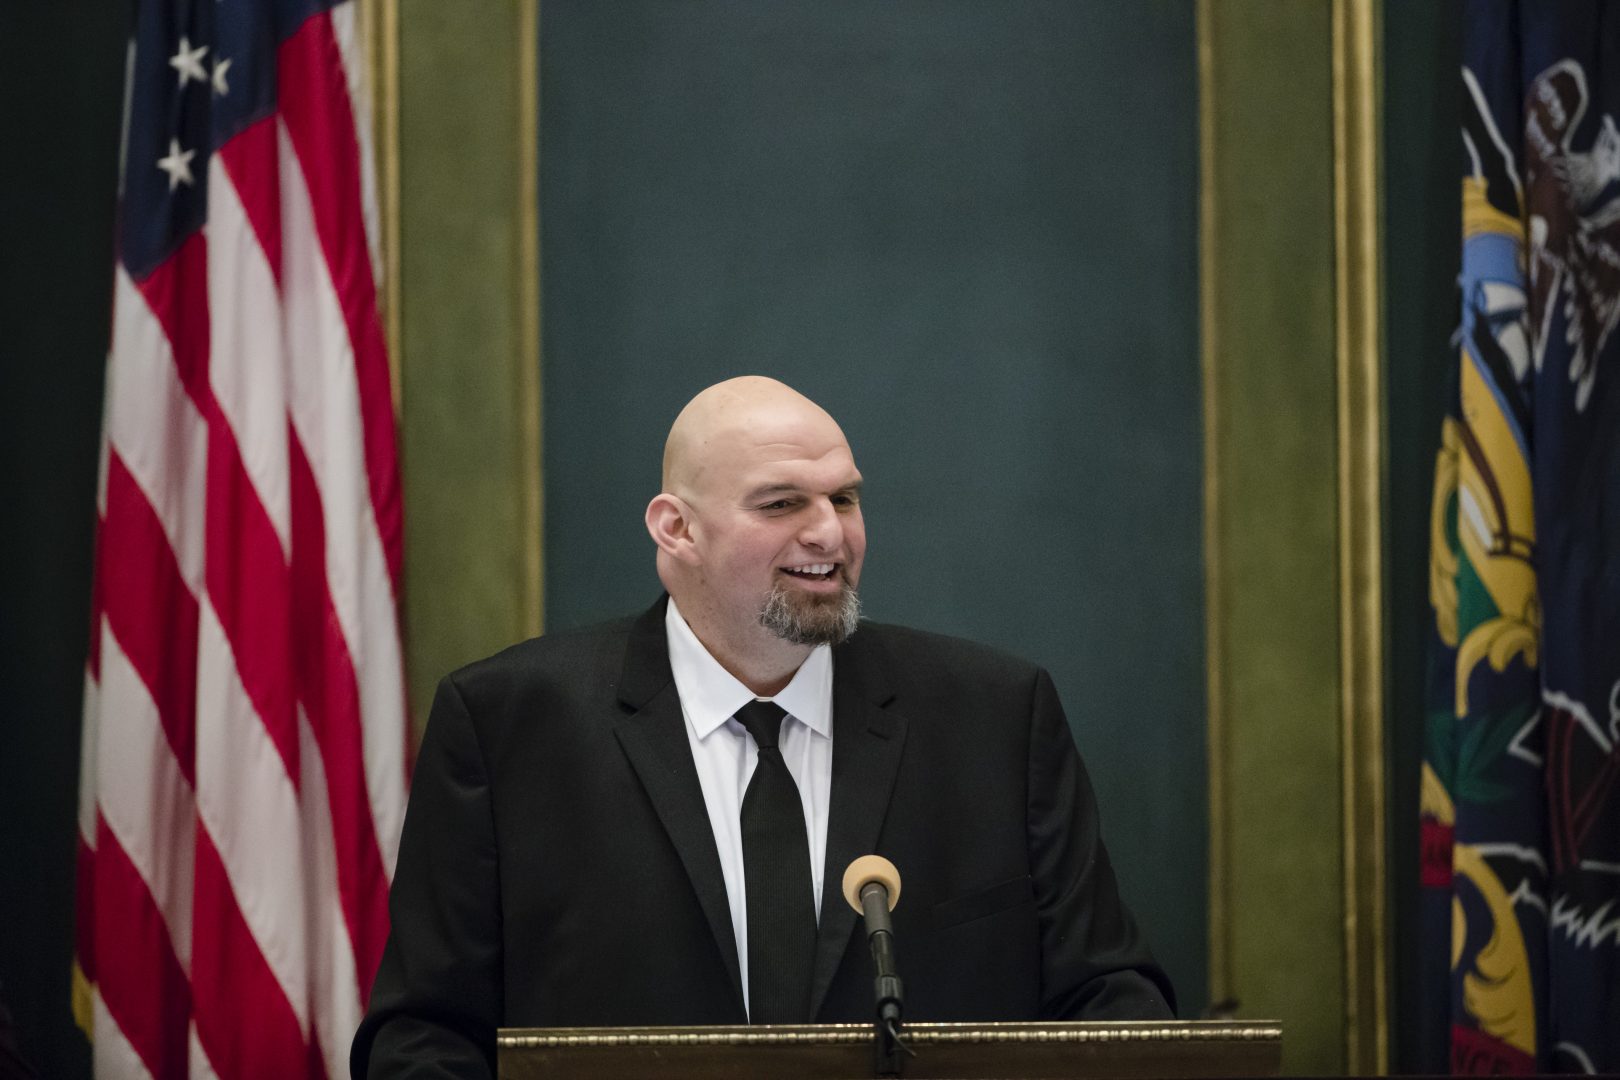 FILE PHOTO: Pennsylvania Lieutenant Governor John Fetterman speaks after he was sworn into office on Tuesday, Jan. 15, 2019, at the state Capitol in Harrisburg, Pa.